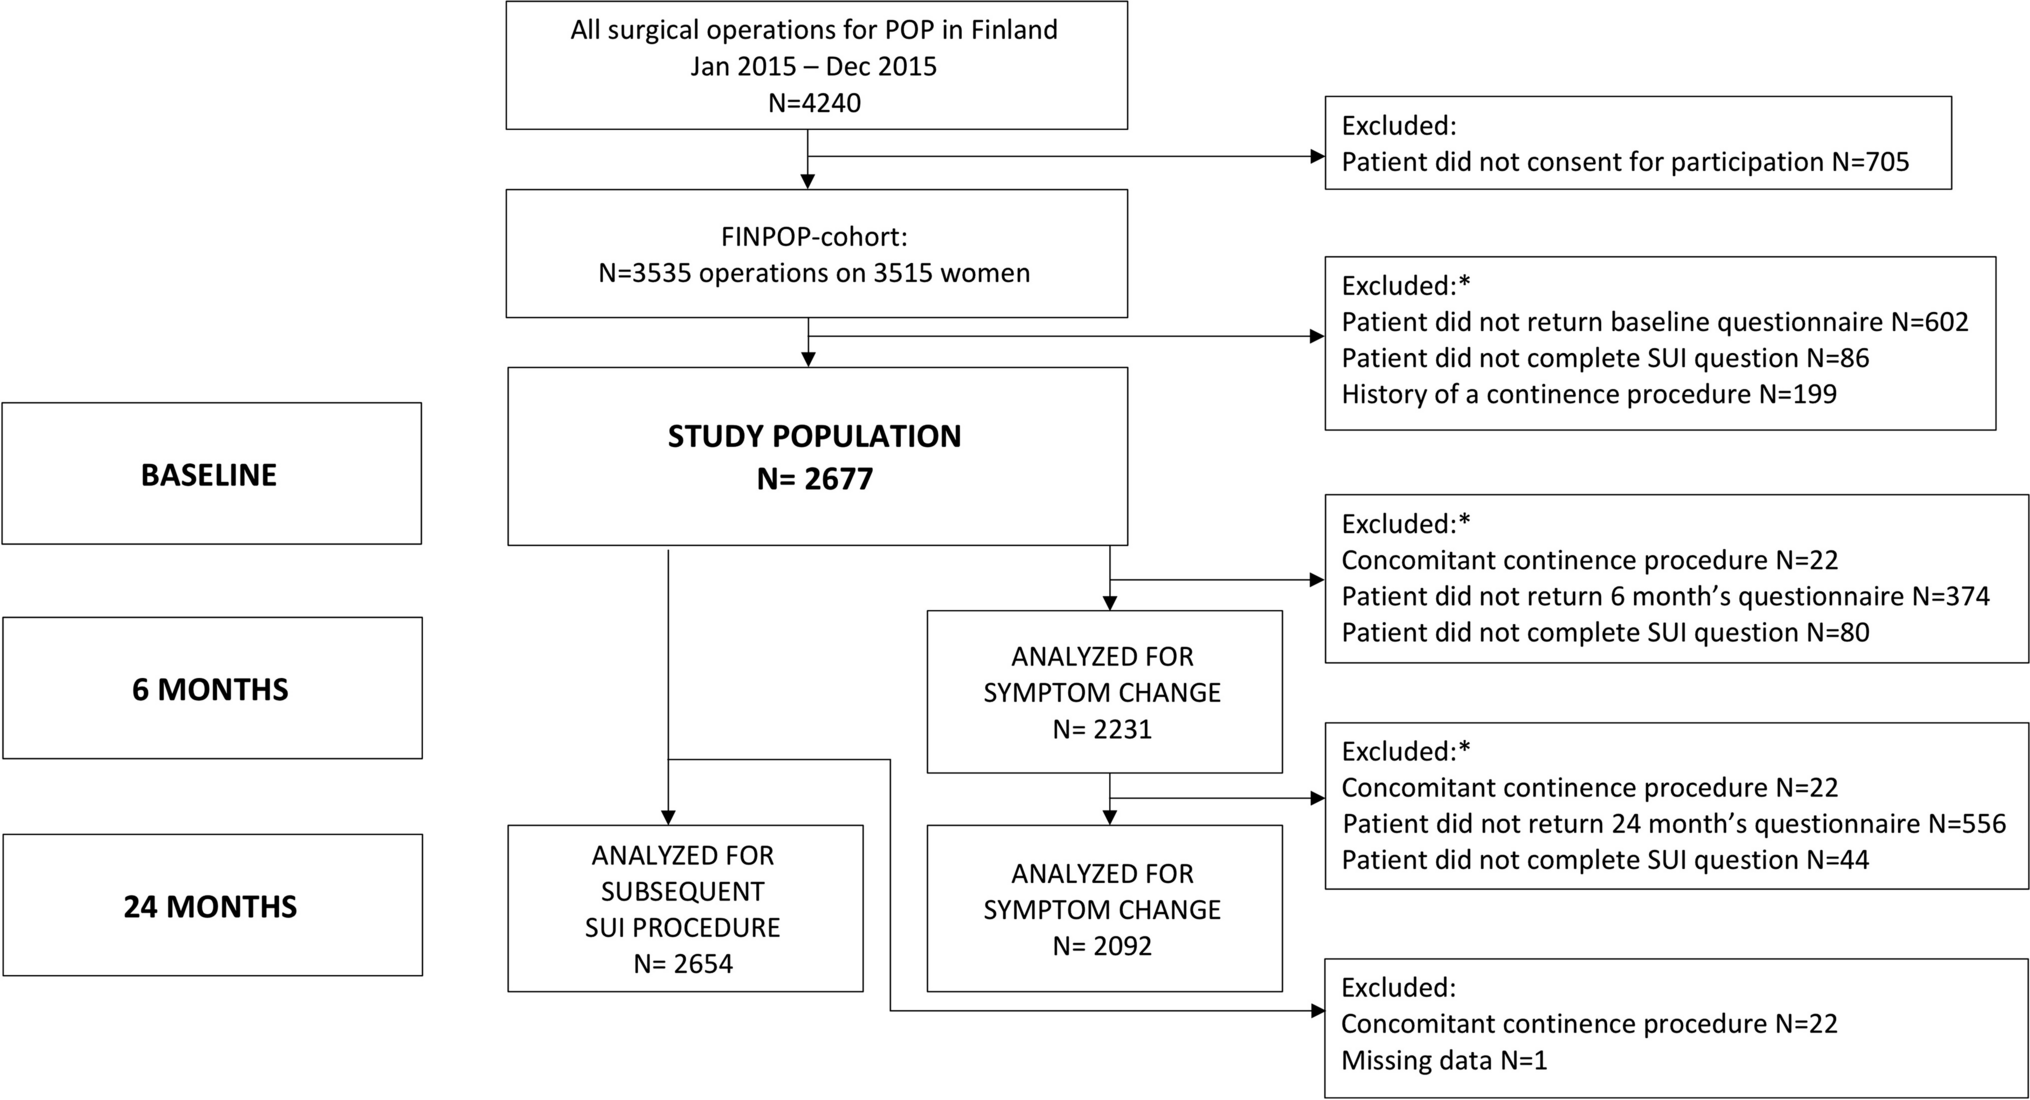 Changes in Stress Urinary Incontinence Symptoms after Pelvic Organ Prolapse Surgery: a Nationwide Cohort Study (FINPOP)